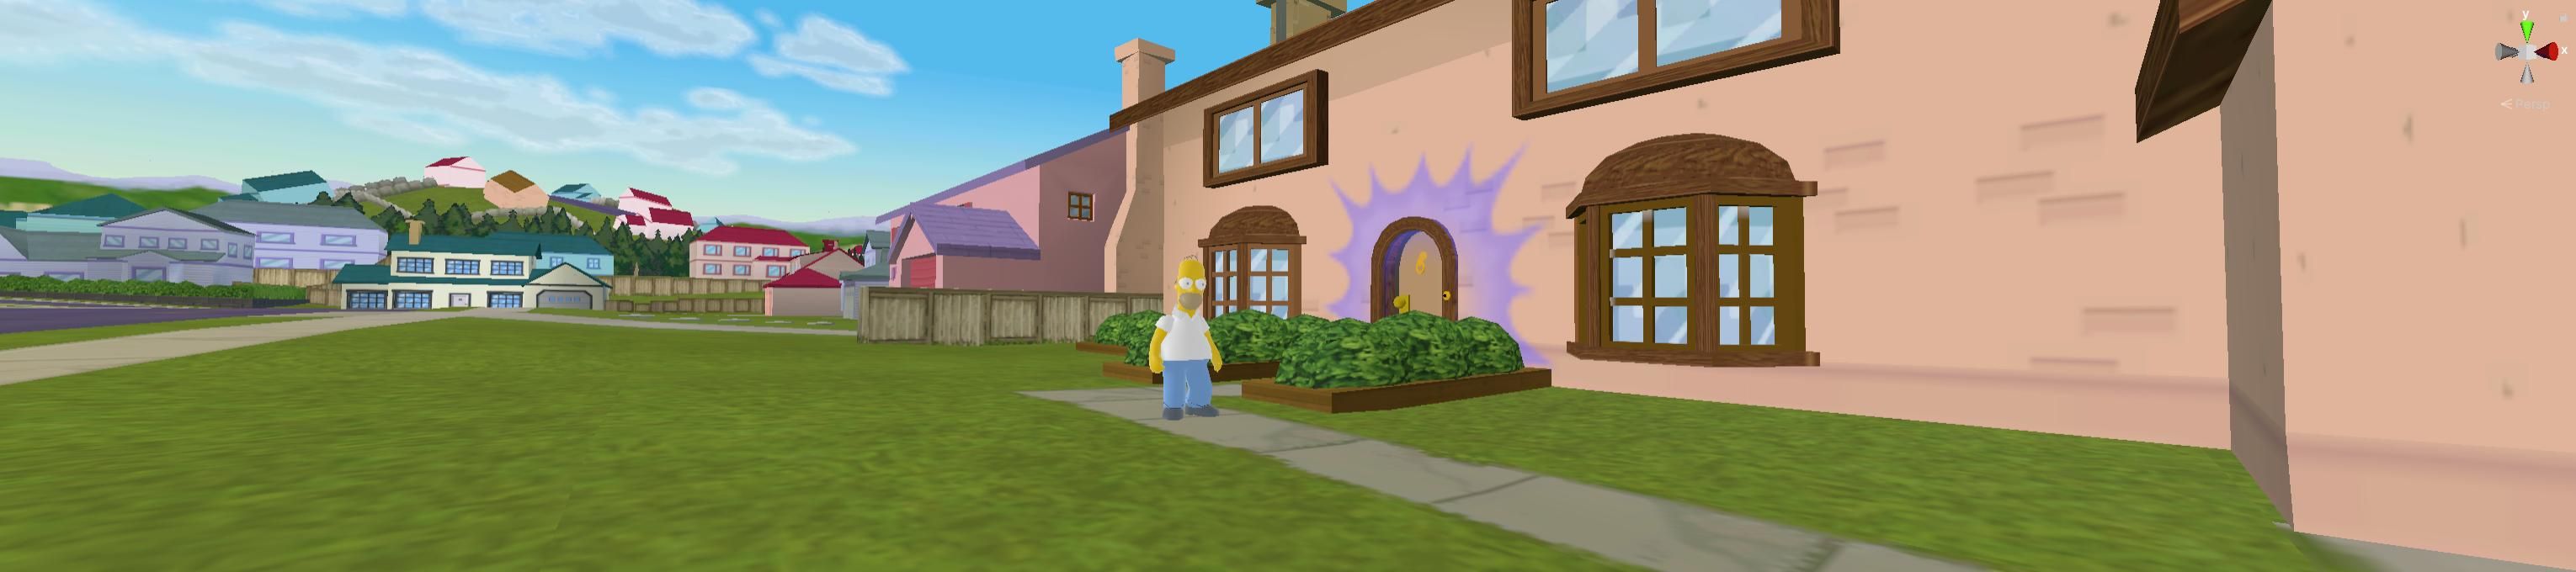 Homer in front of the Simpson's House.